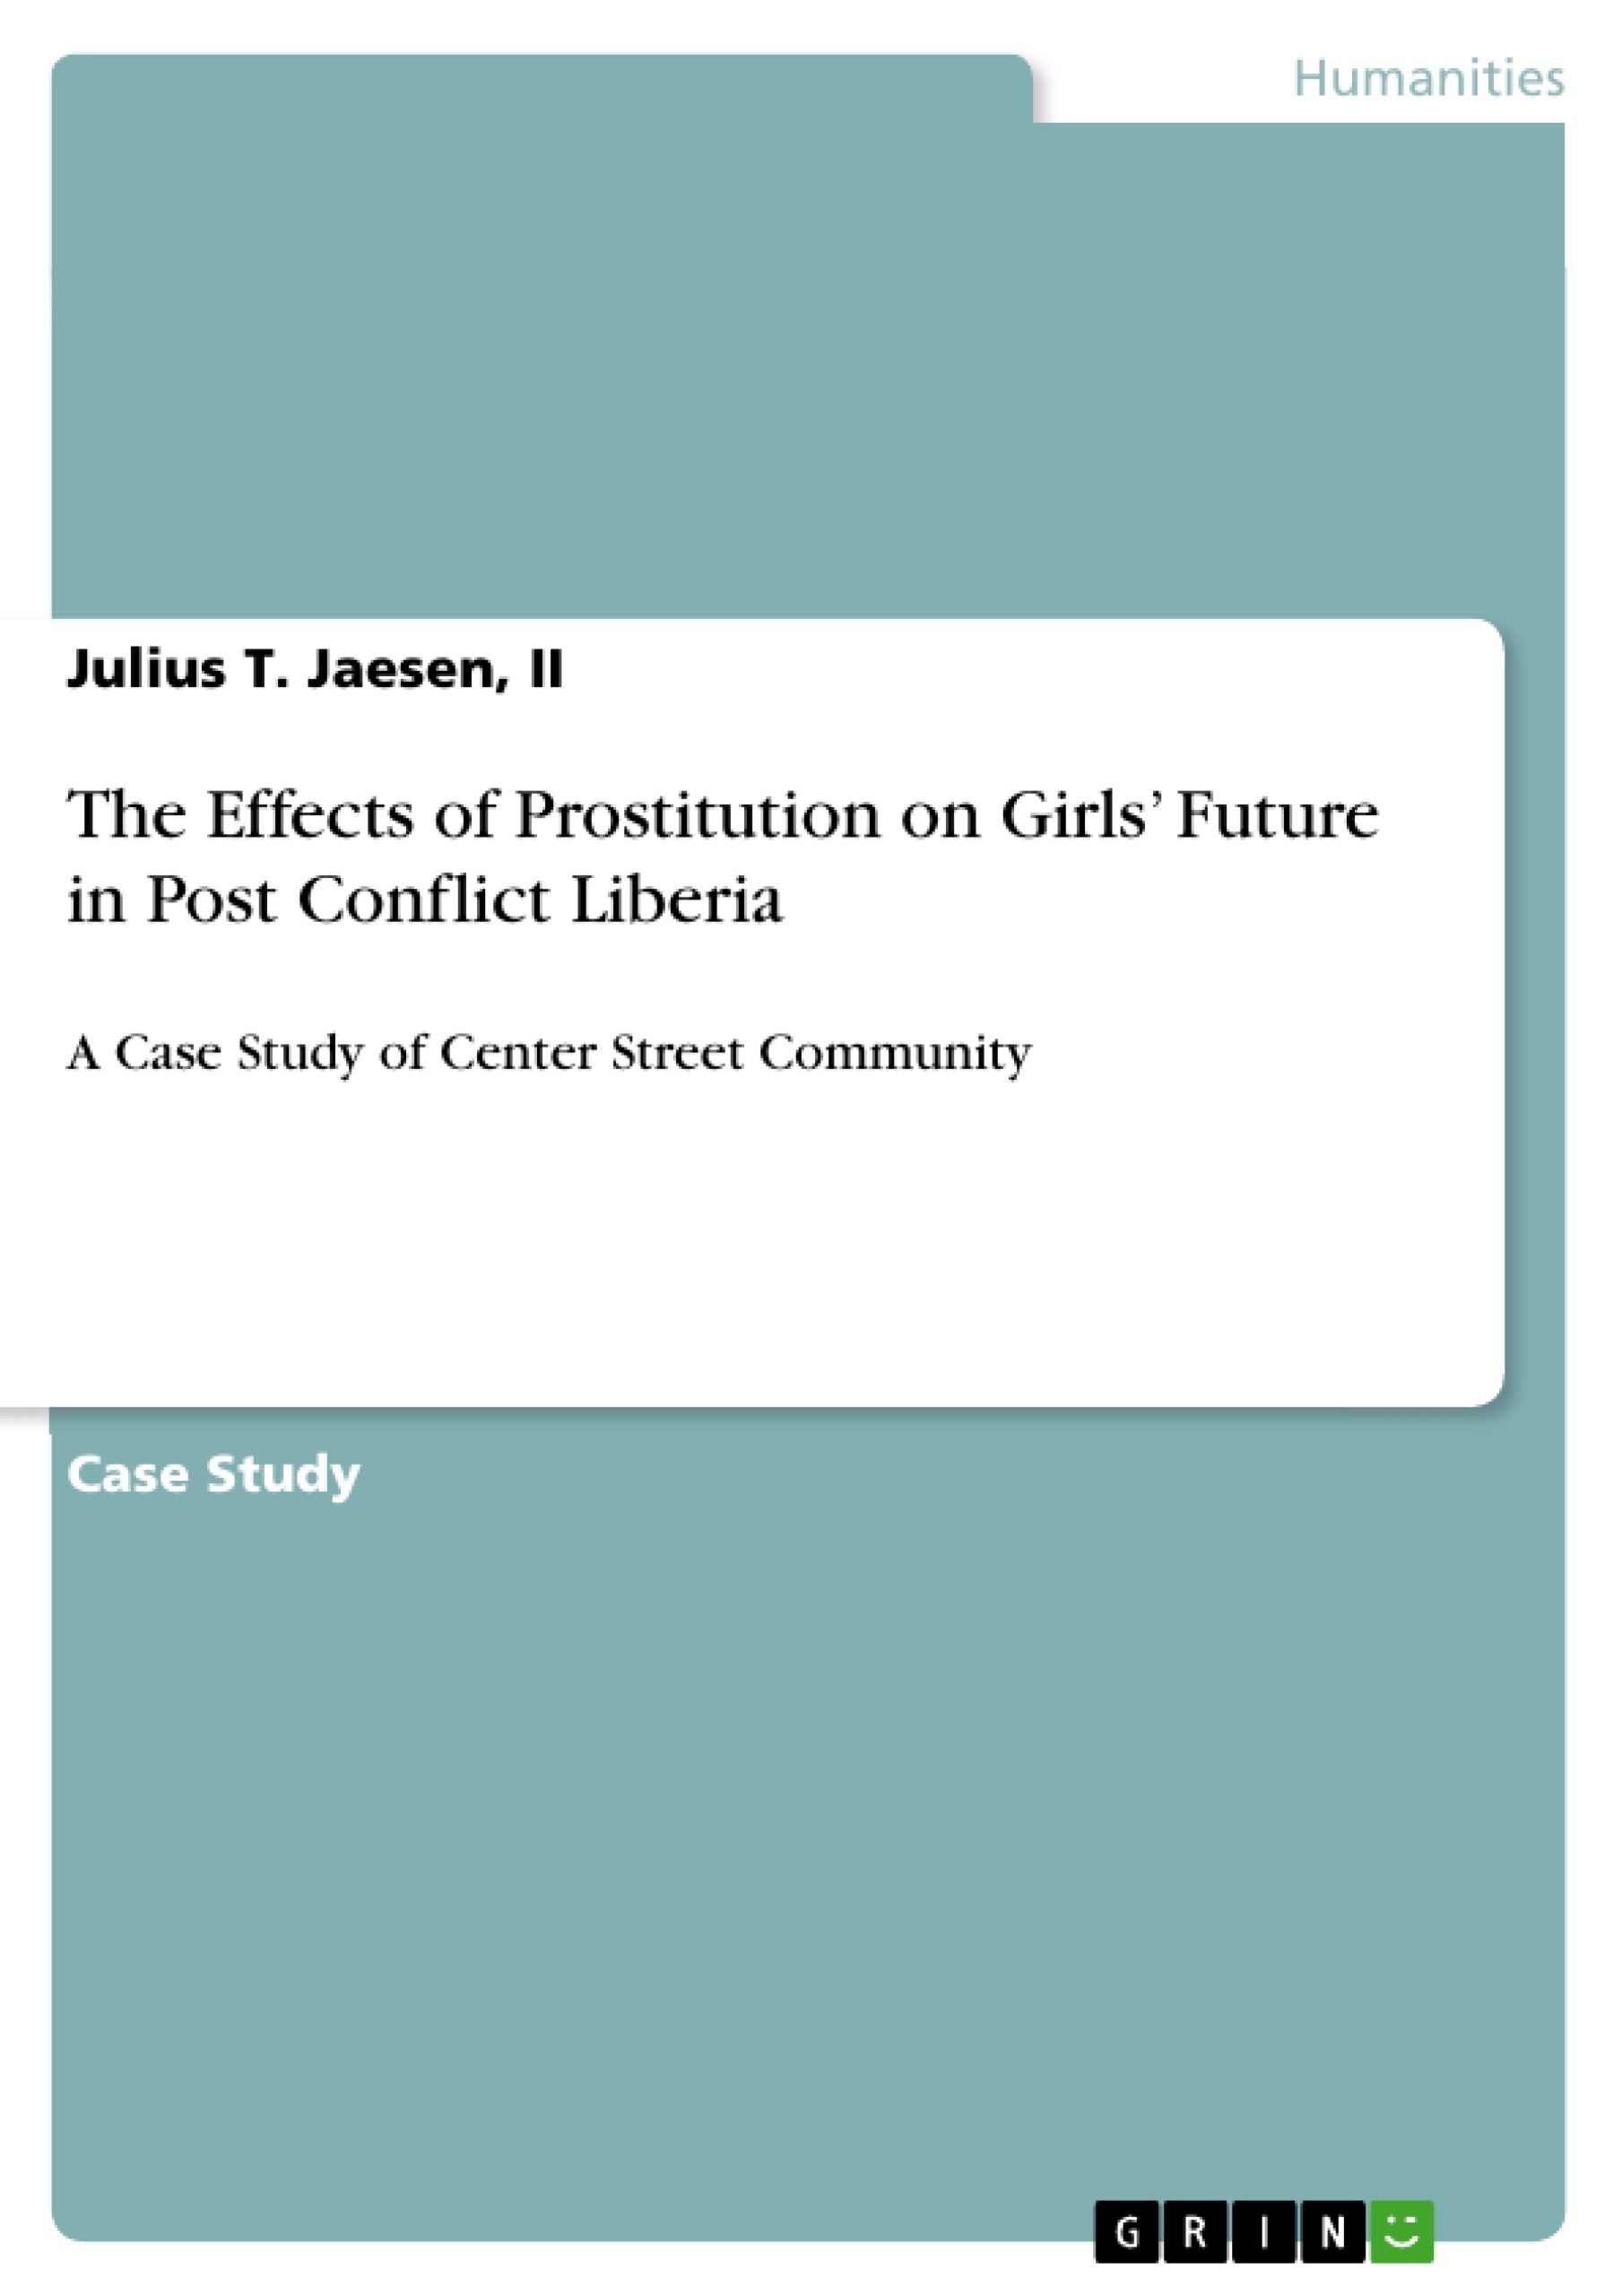 Title: The Effects of Prostitution on Girls’ Future in Post Conflict Liberia